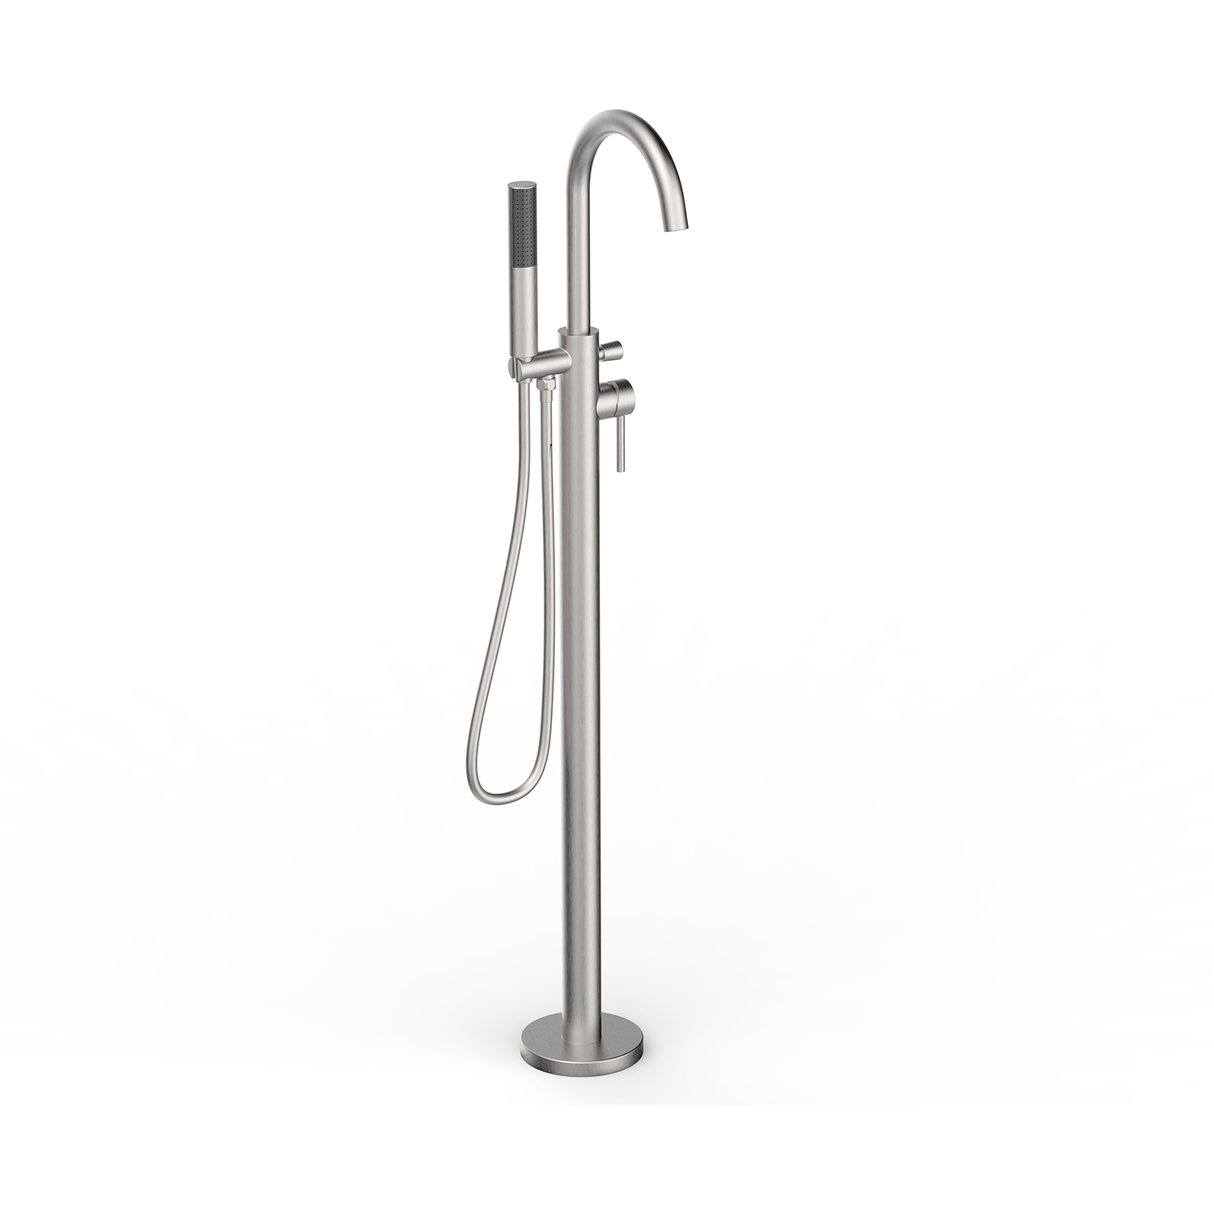 DAX Brass Freestanding Tub Filler with Hand Shower and Gooseneck Spout, Brushed Nickel DAX-8823-BN